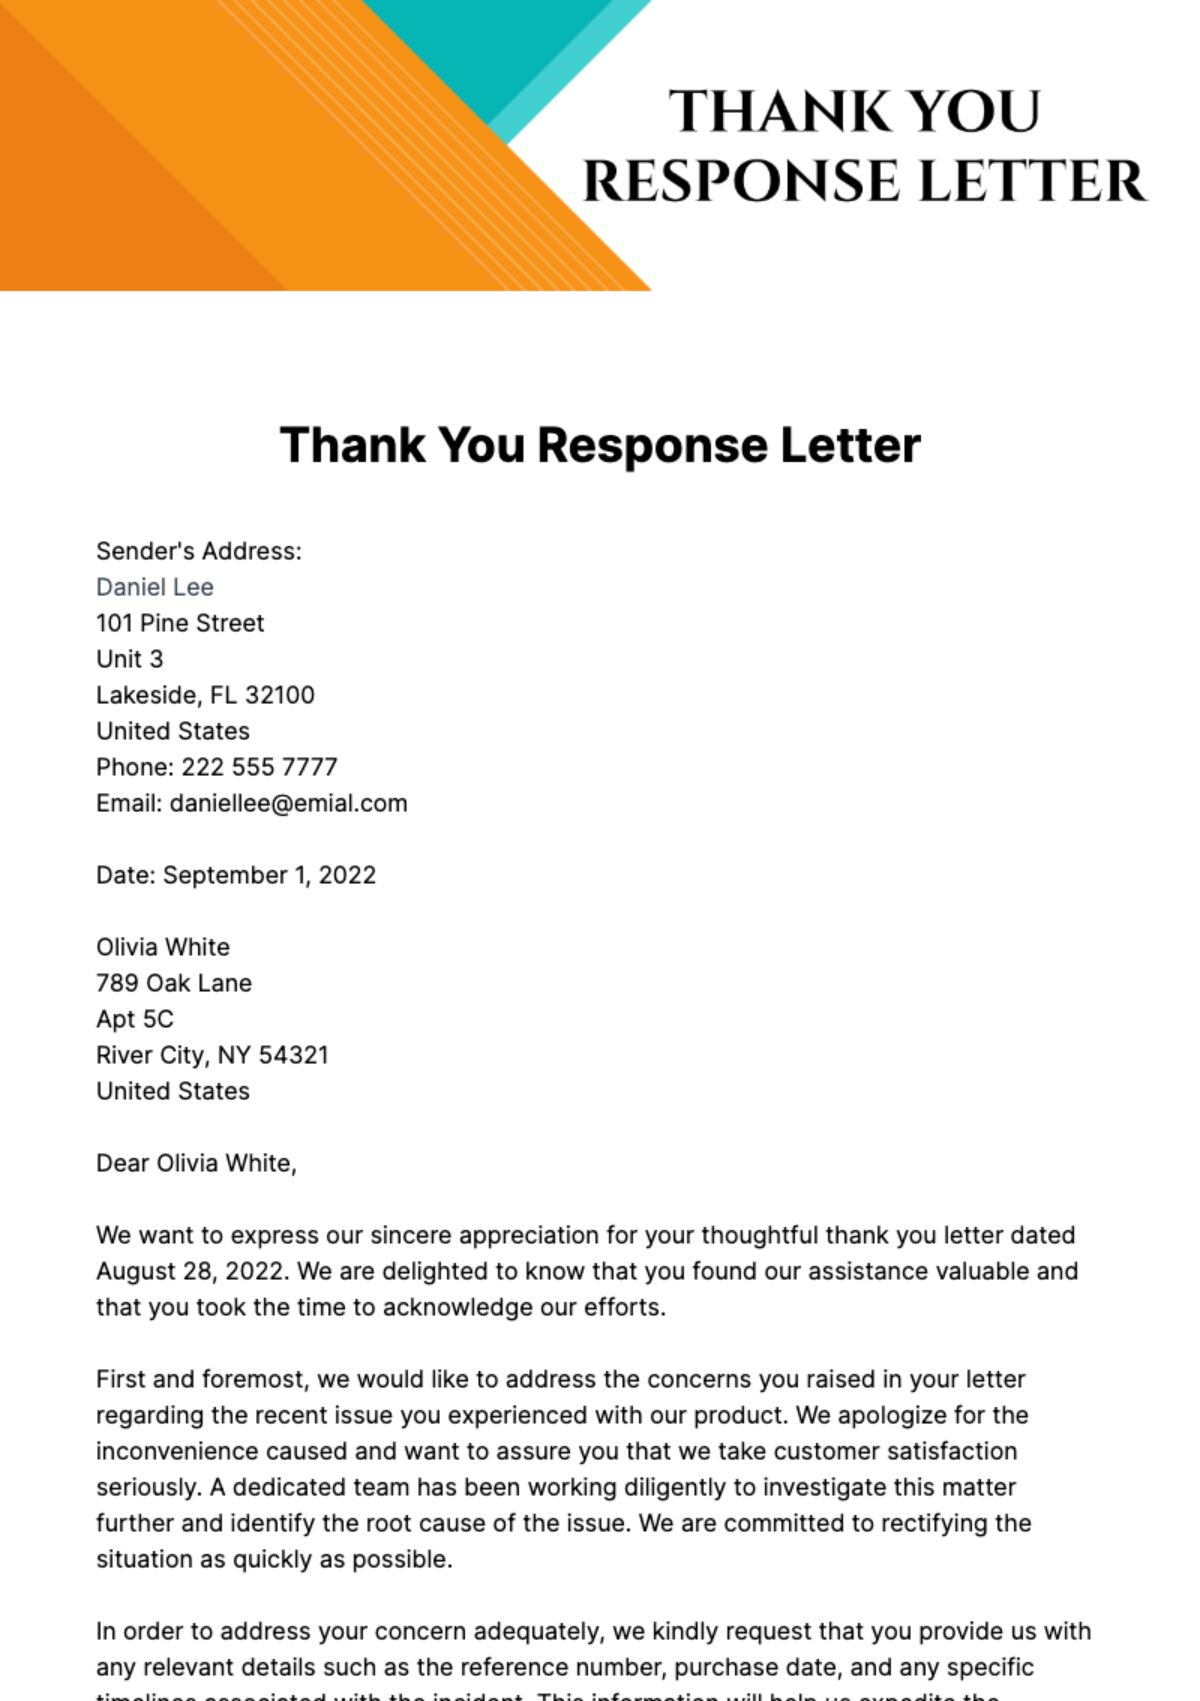 Free Thank You Response Letter Template